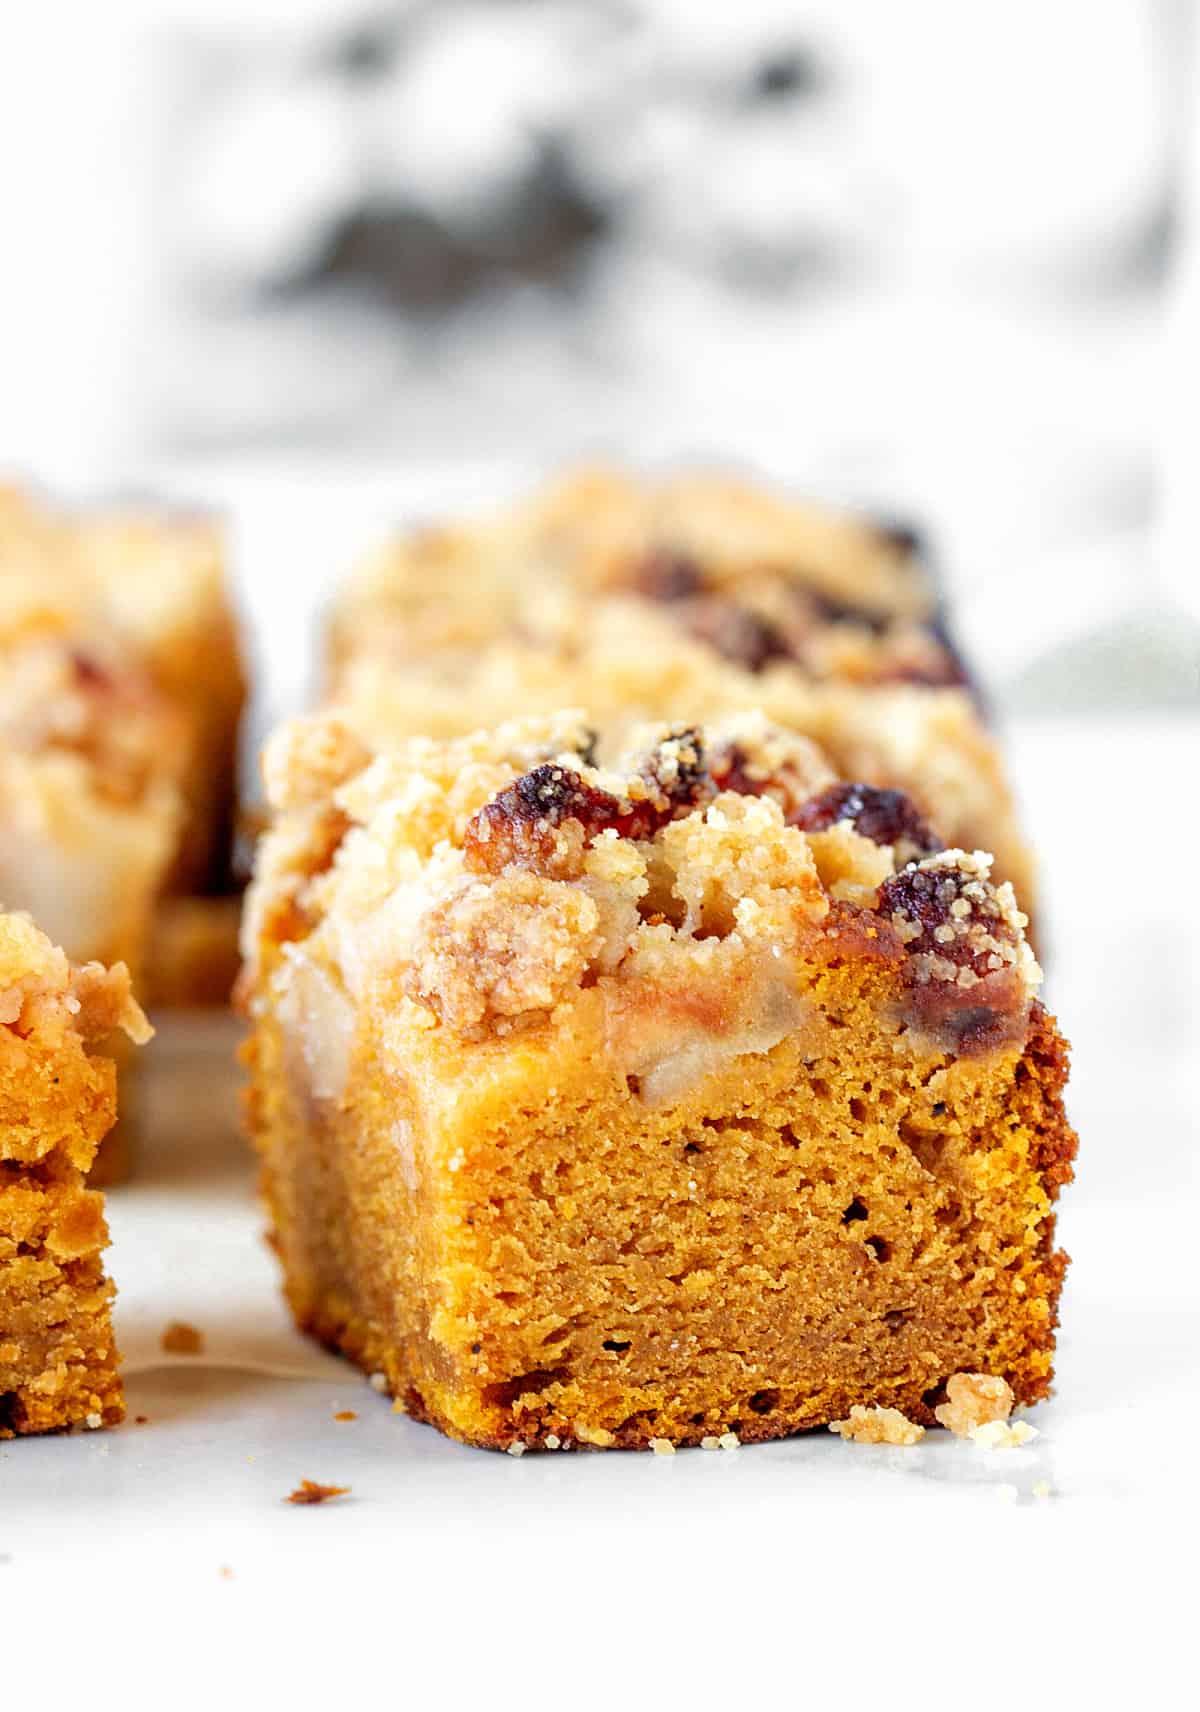 Square of pumpkin cake with apples and crumble, white greyish surface